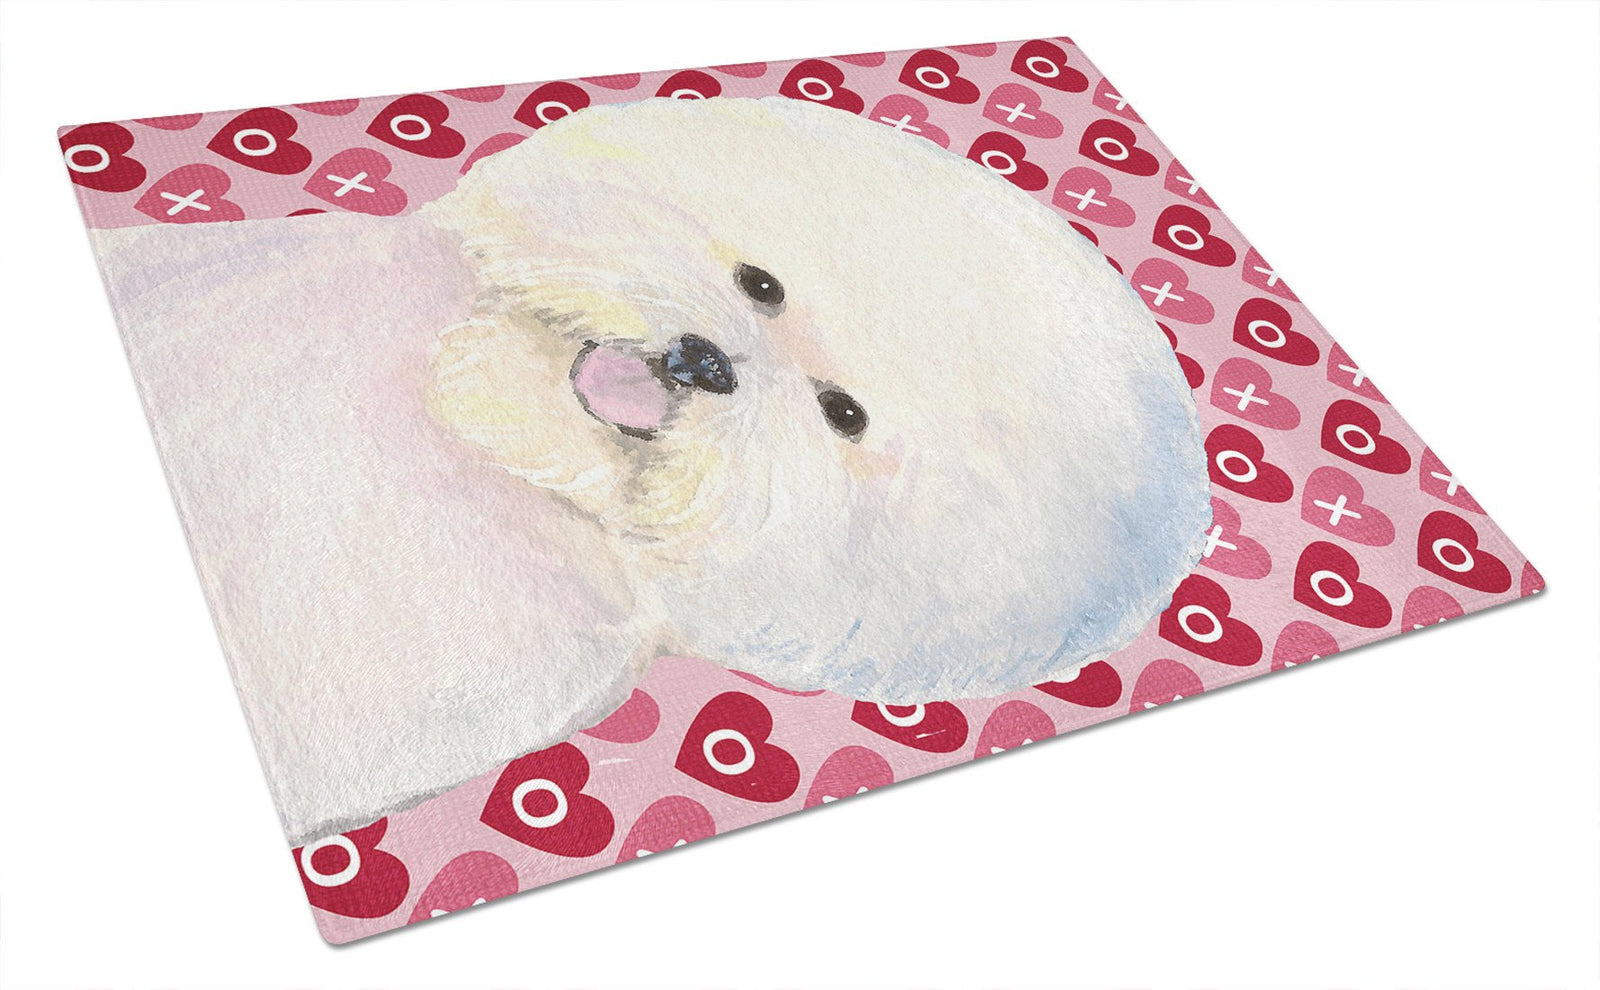 Bichon Frise Hearts Love and Valentine's Day Portrait Glass Cutting Board Large by Caroline's Treasures